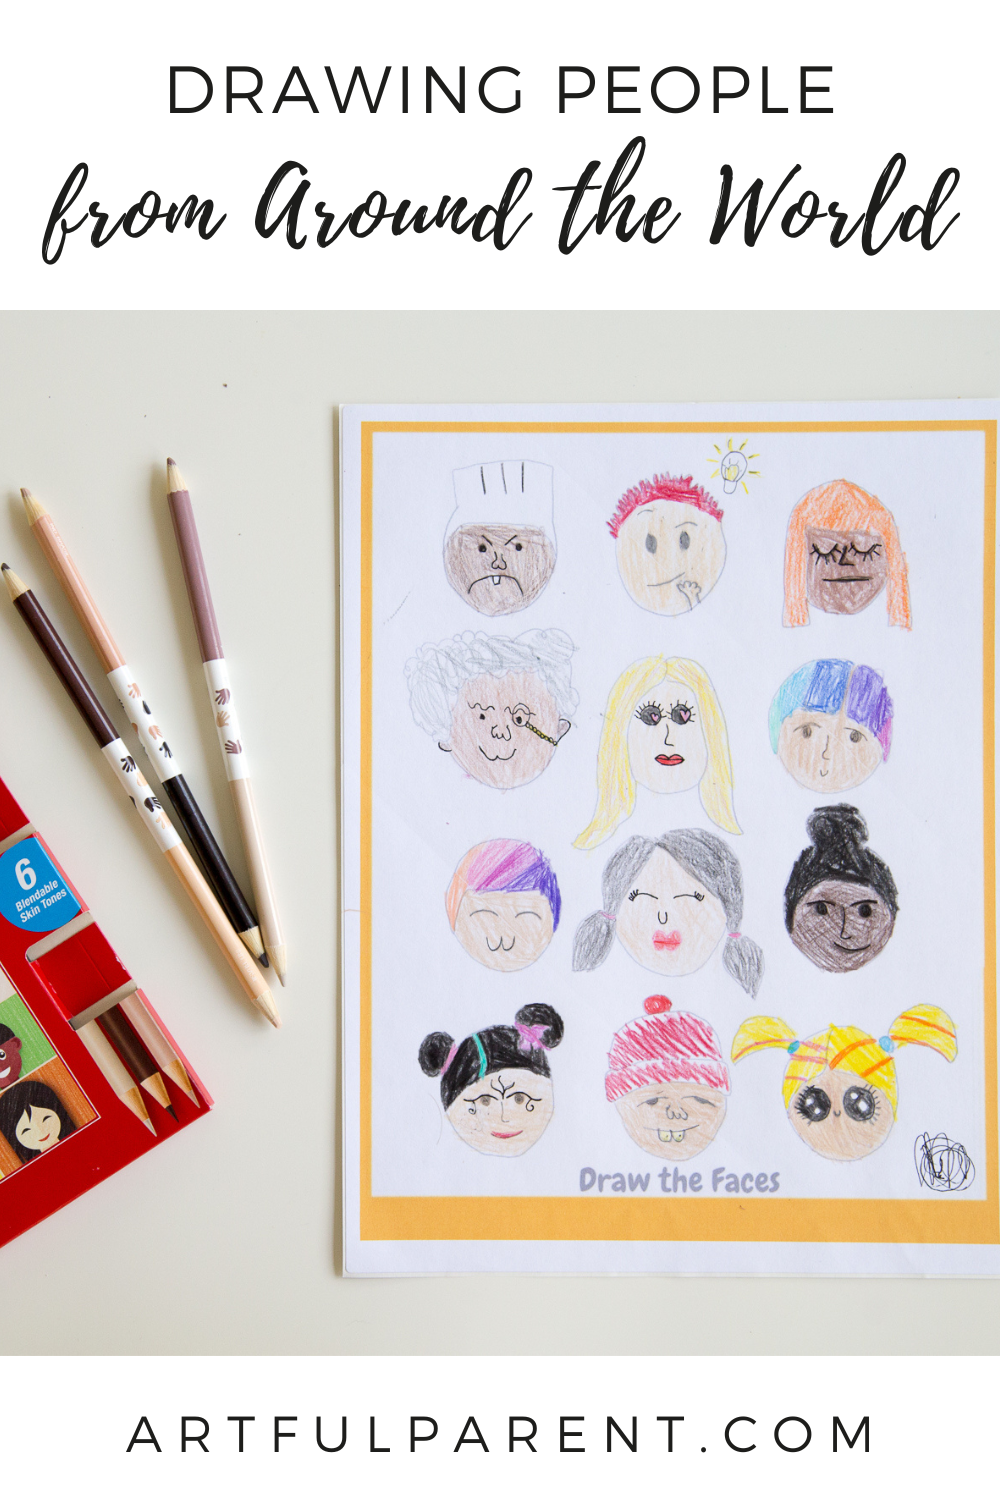 Drawing People from Around the World (+ FREE PRINTABLE)